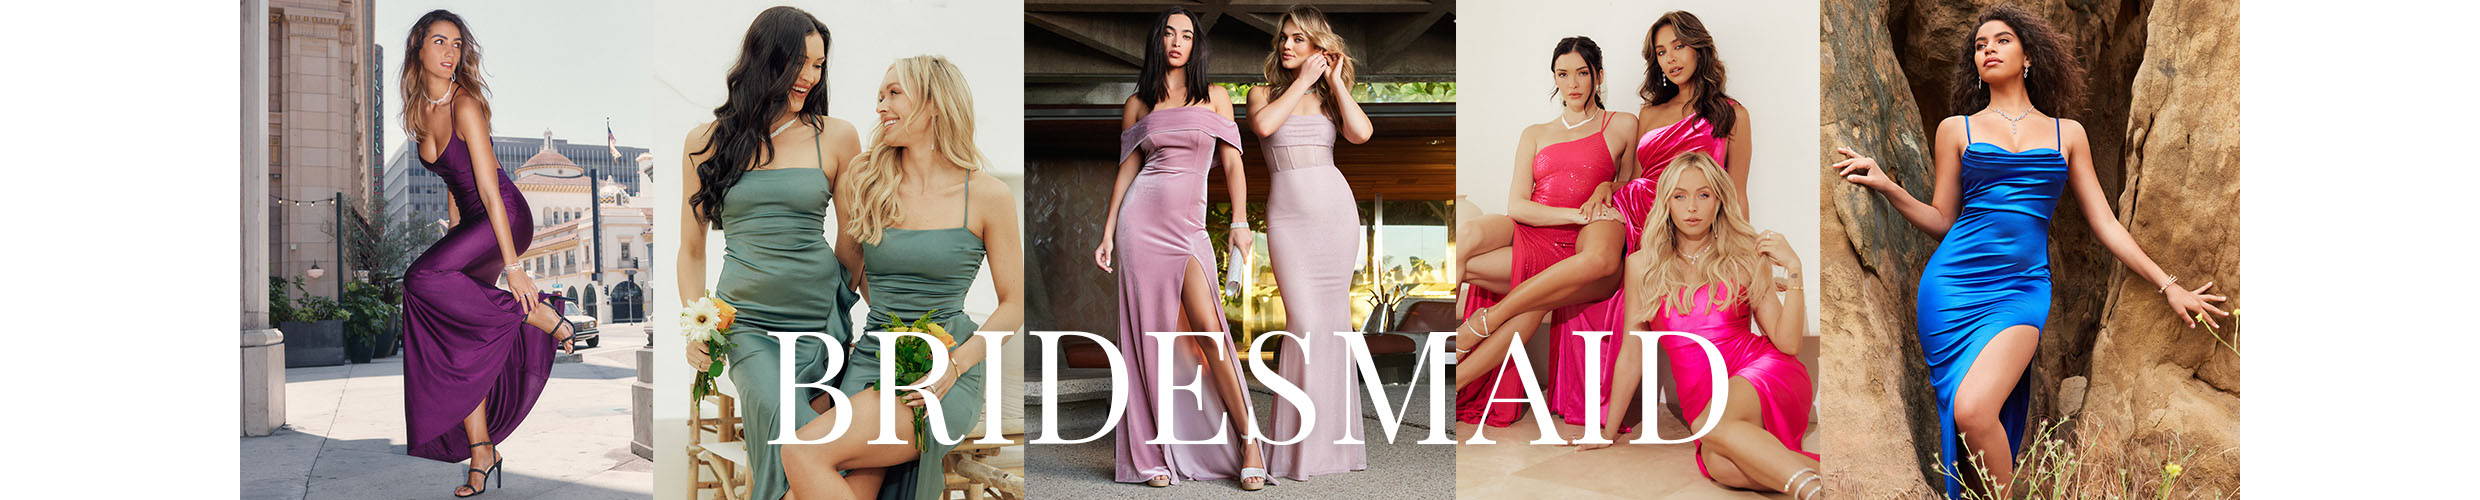 Capture bridesmaid dresses that fit your wedding theme with a variety of colors, figure-flattering styles, and lightweight, stretchy, or breathable fabrics that you can mix and match to find the perfect bridesmaid dresses for an elevated bridal party look!